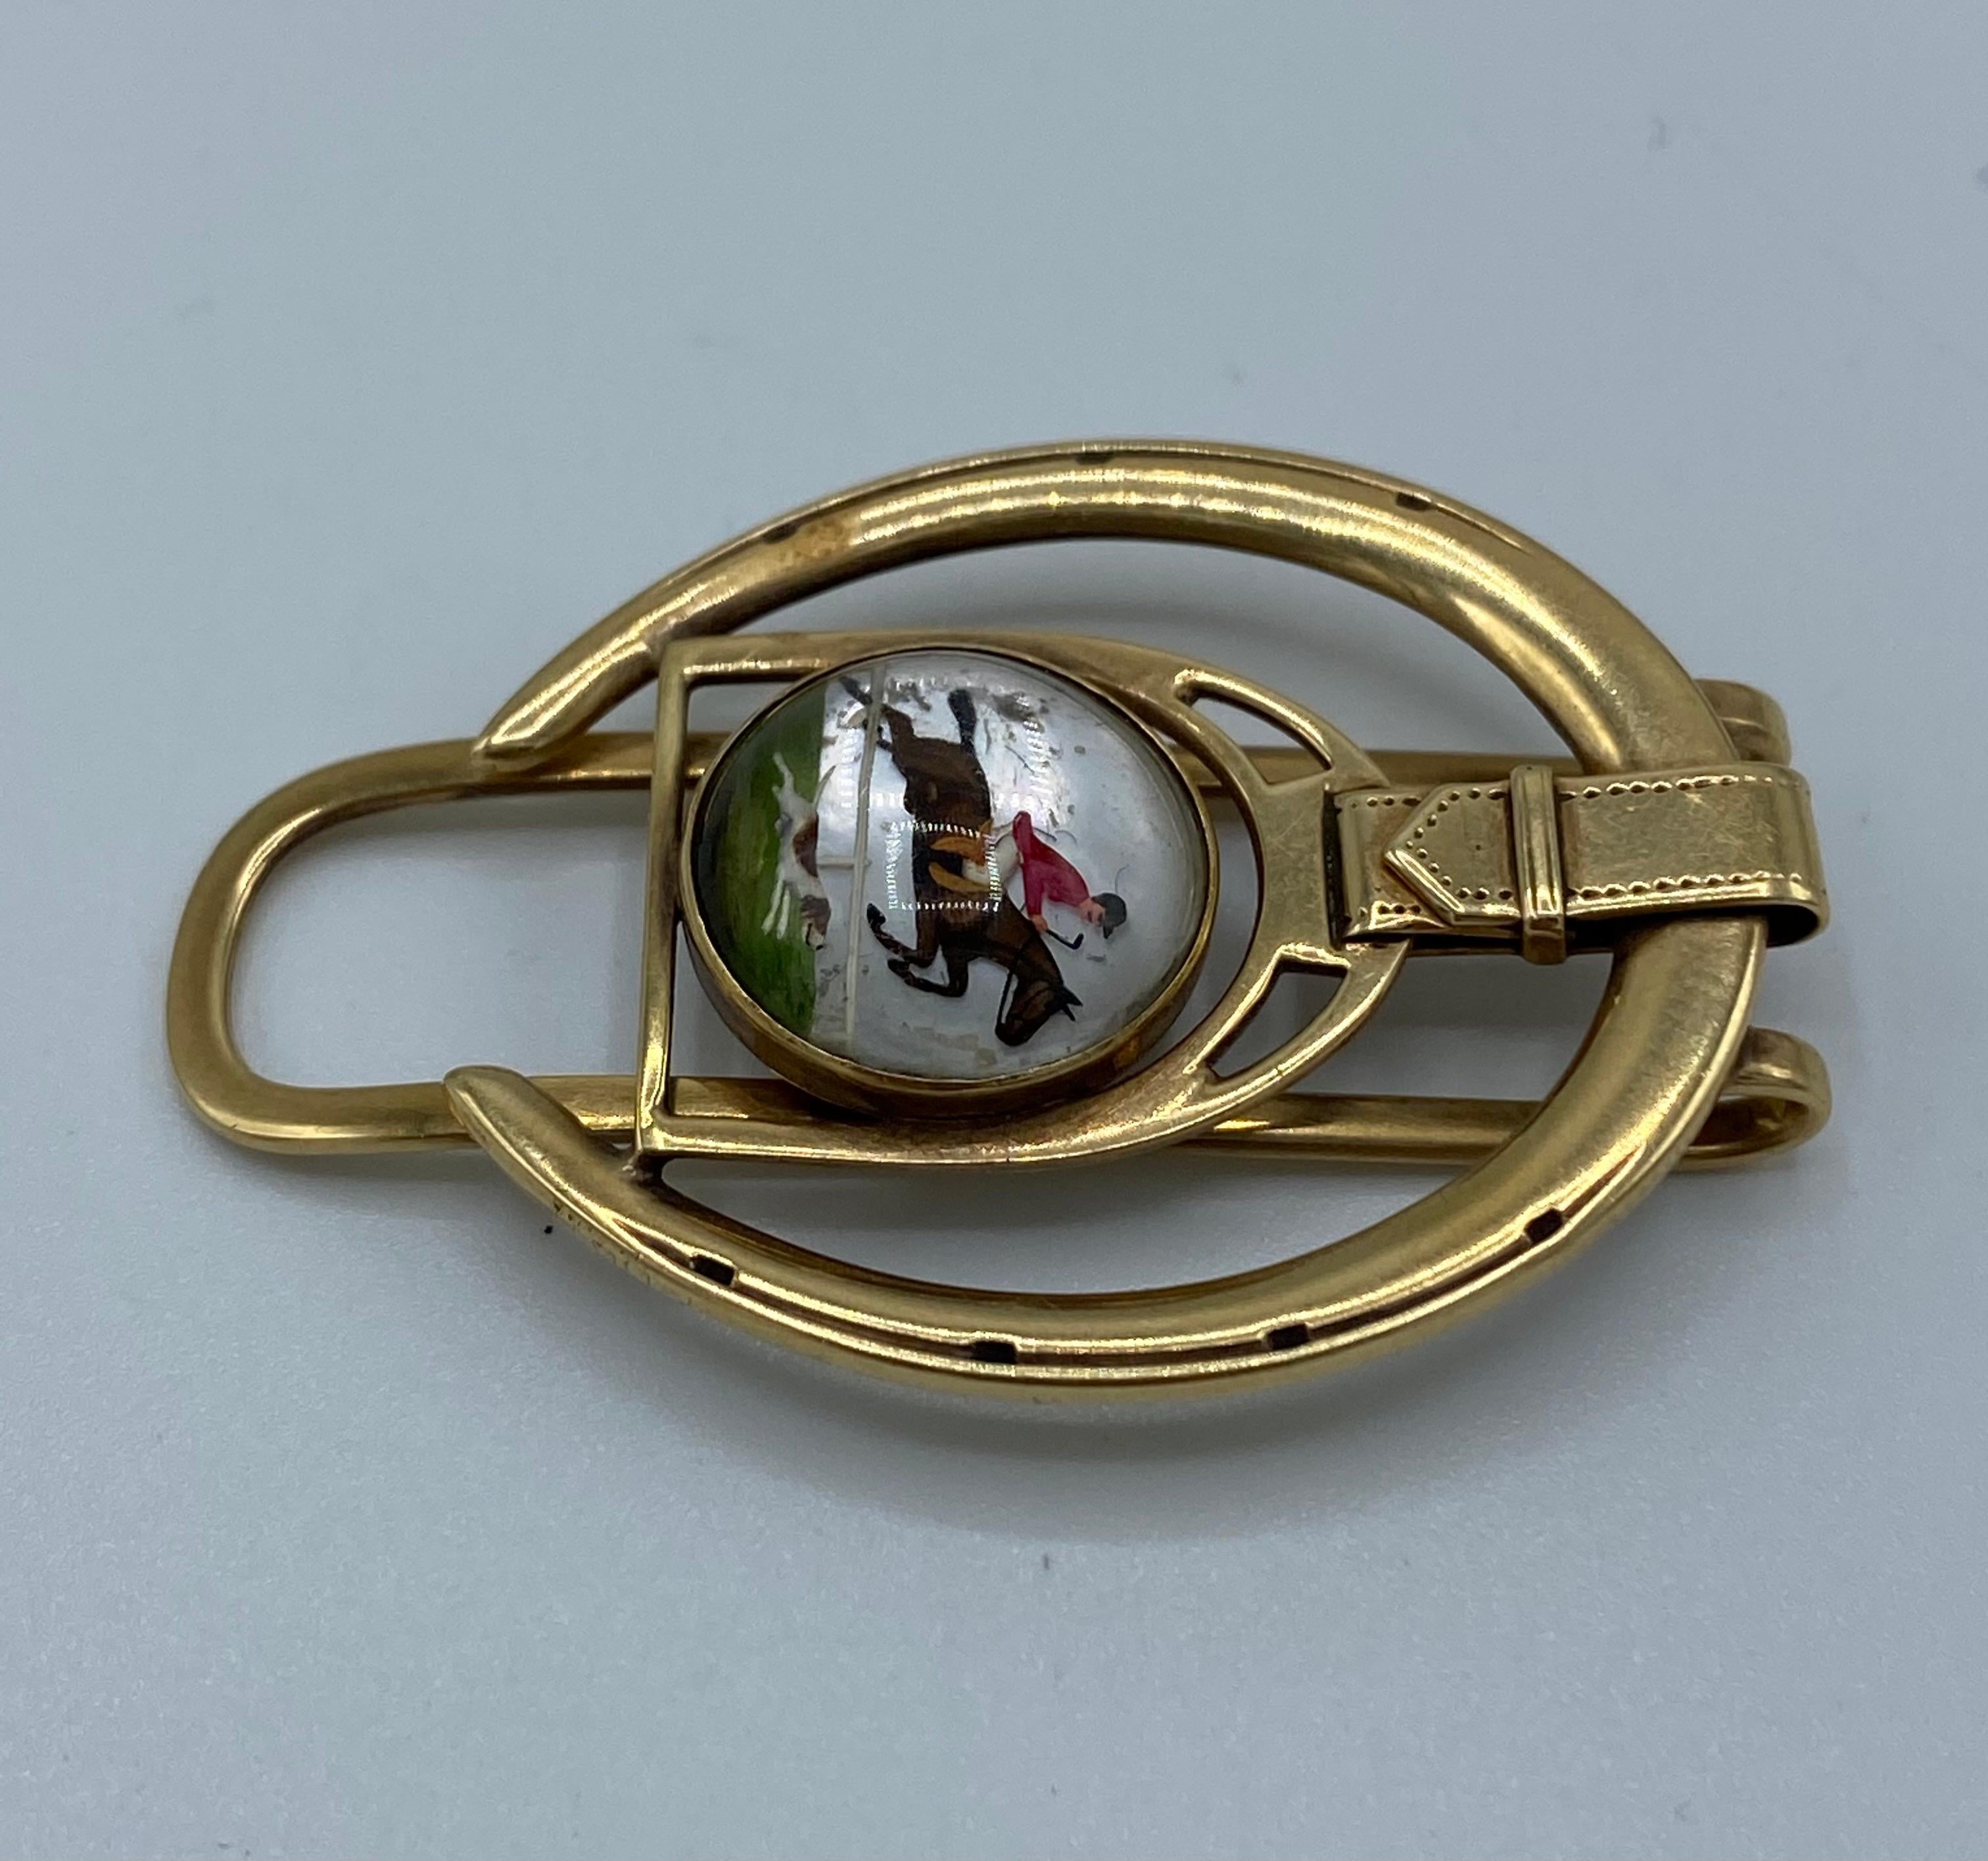 Product details:

The money clip is designed by Cartier in the 1940's. It is made out of 14 karat yellow gold, enamel cover with rock crystal over it. It features horseshoe and man on the horse, equestrian motif.